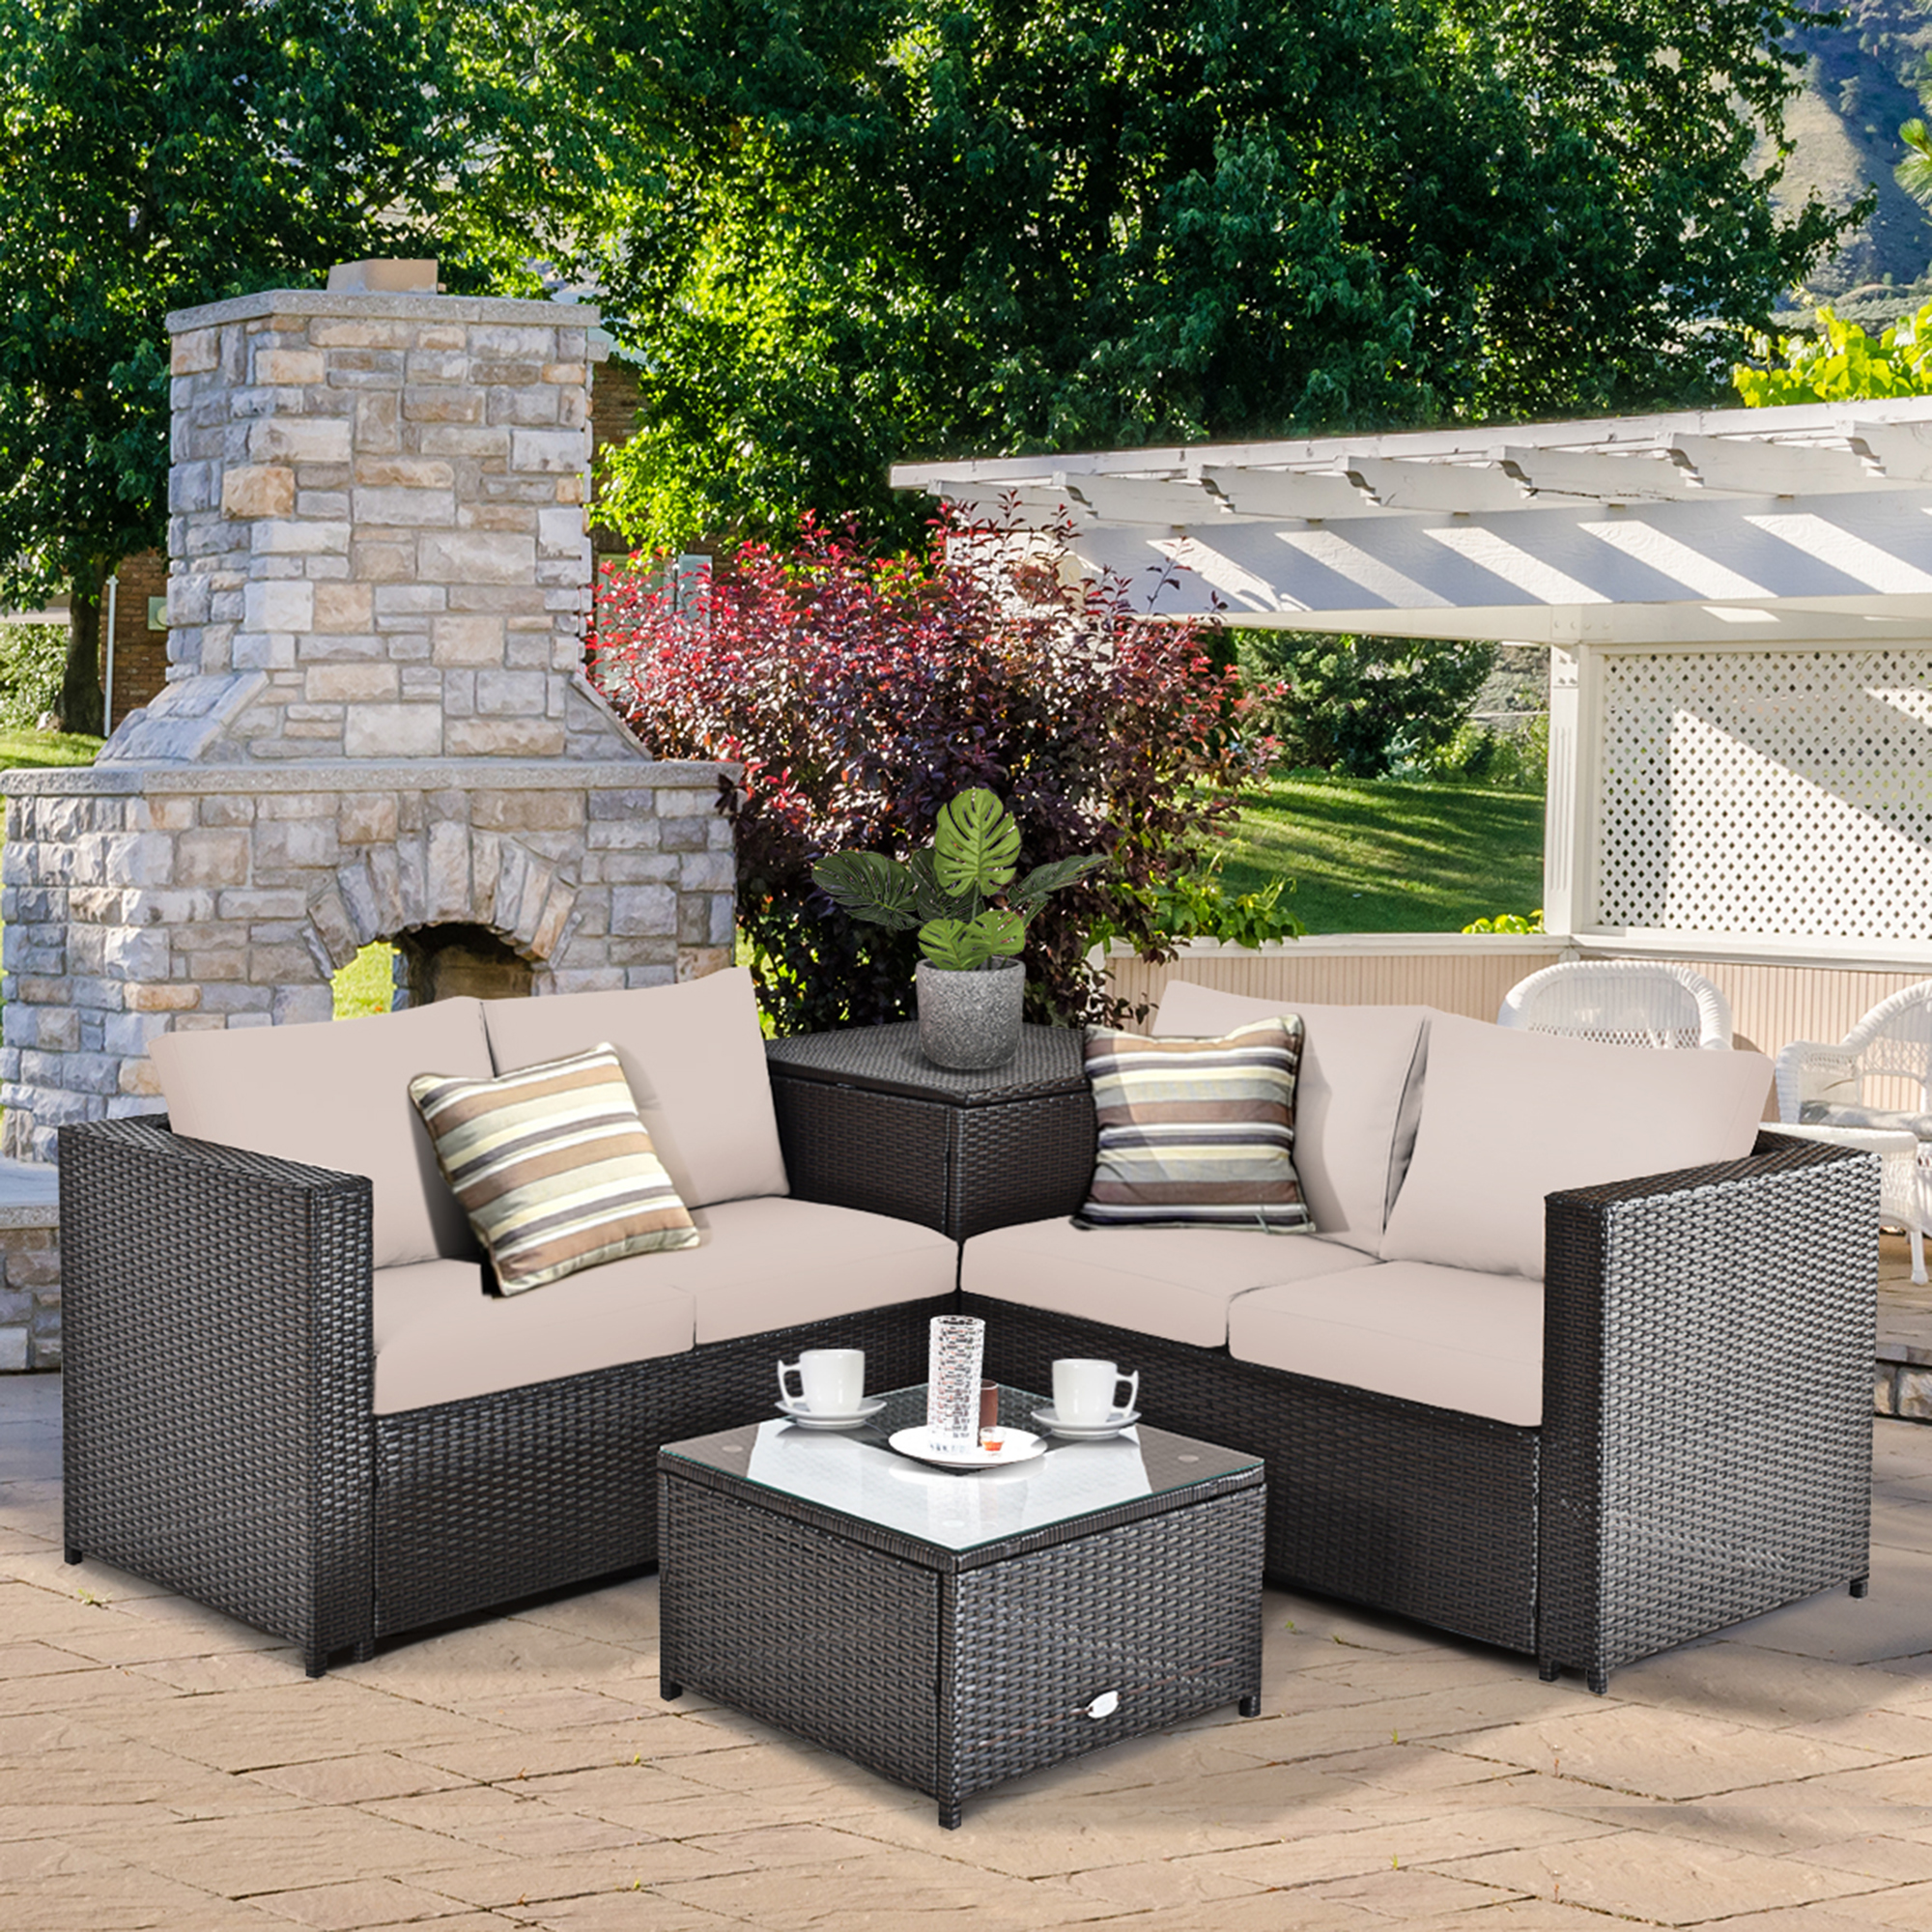 Gymax 4PCS Cushioned Rattan Patio Conversation Set w/ Coffee Table Side Table - image 1 of 10